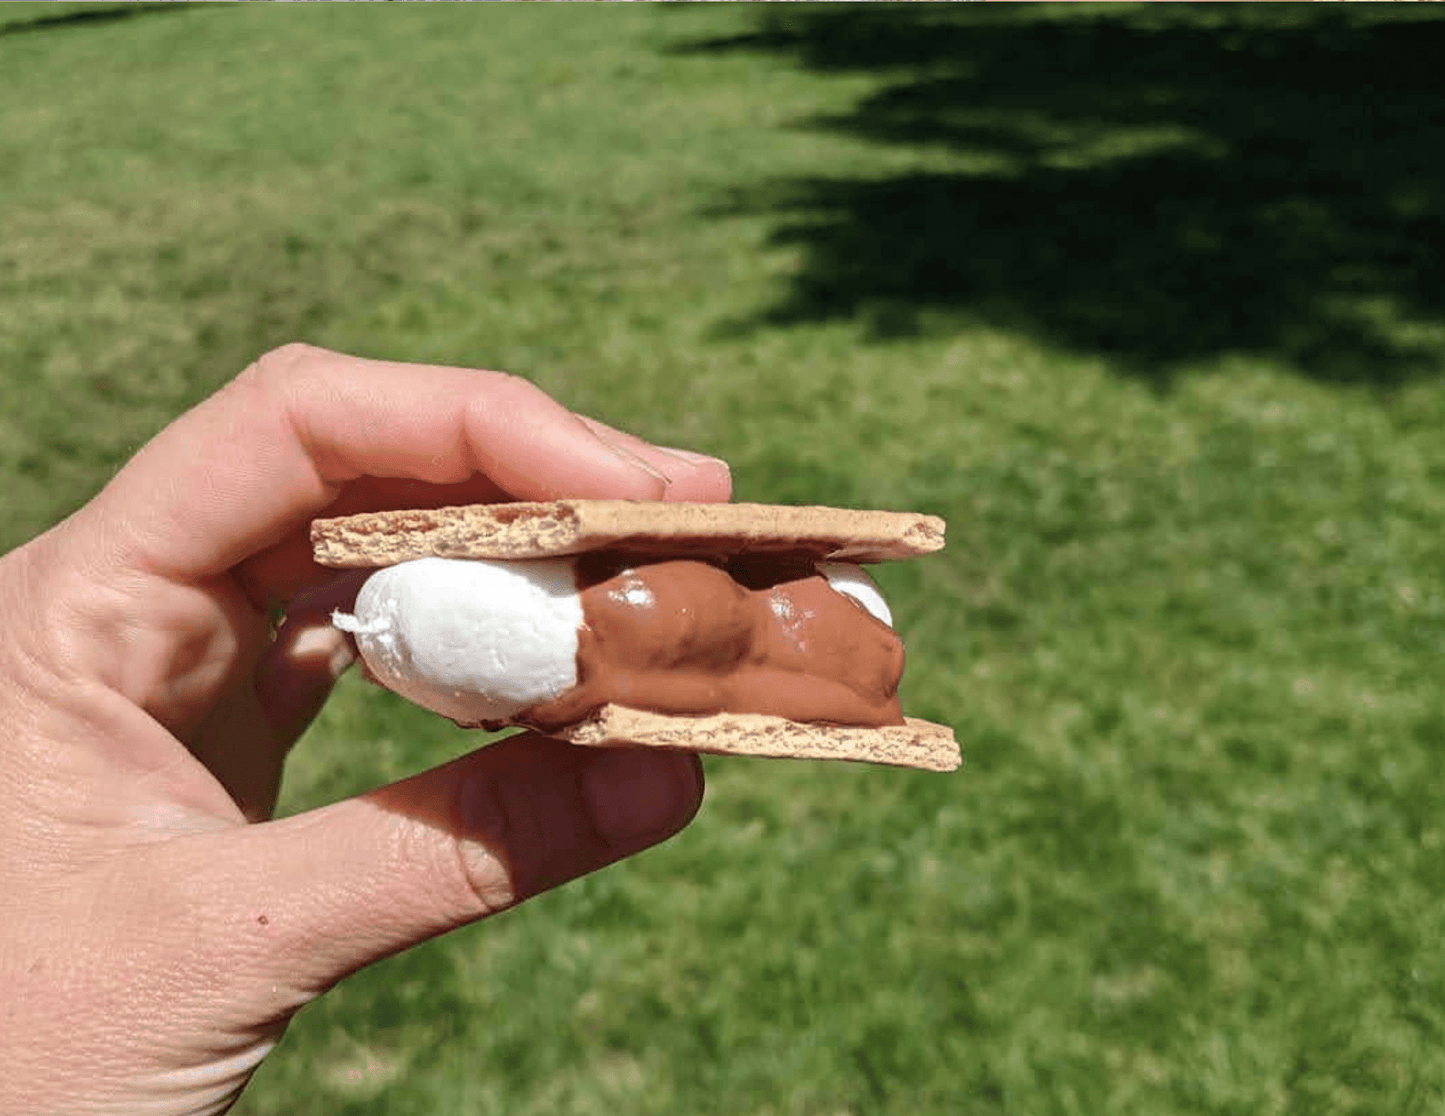 DIY Solar Oven, Make S'mores - 2 Paper Sisters